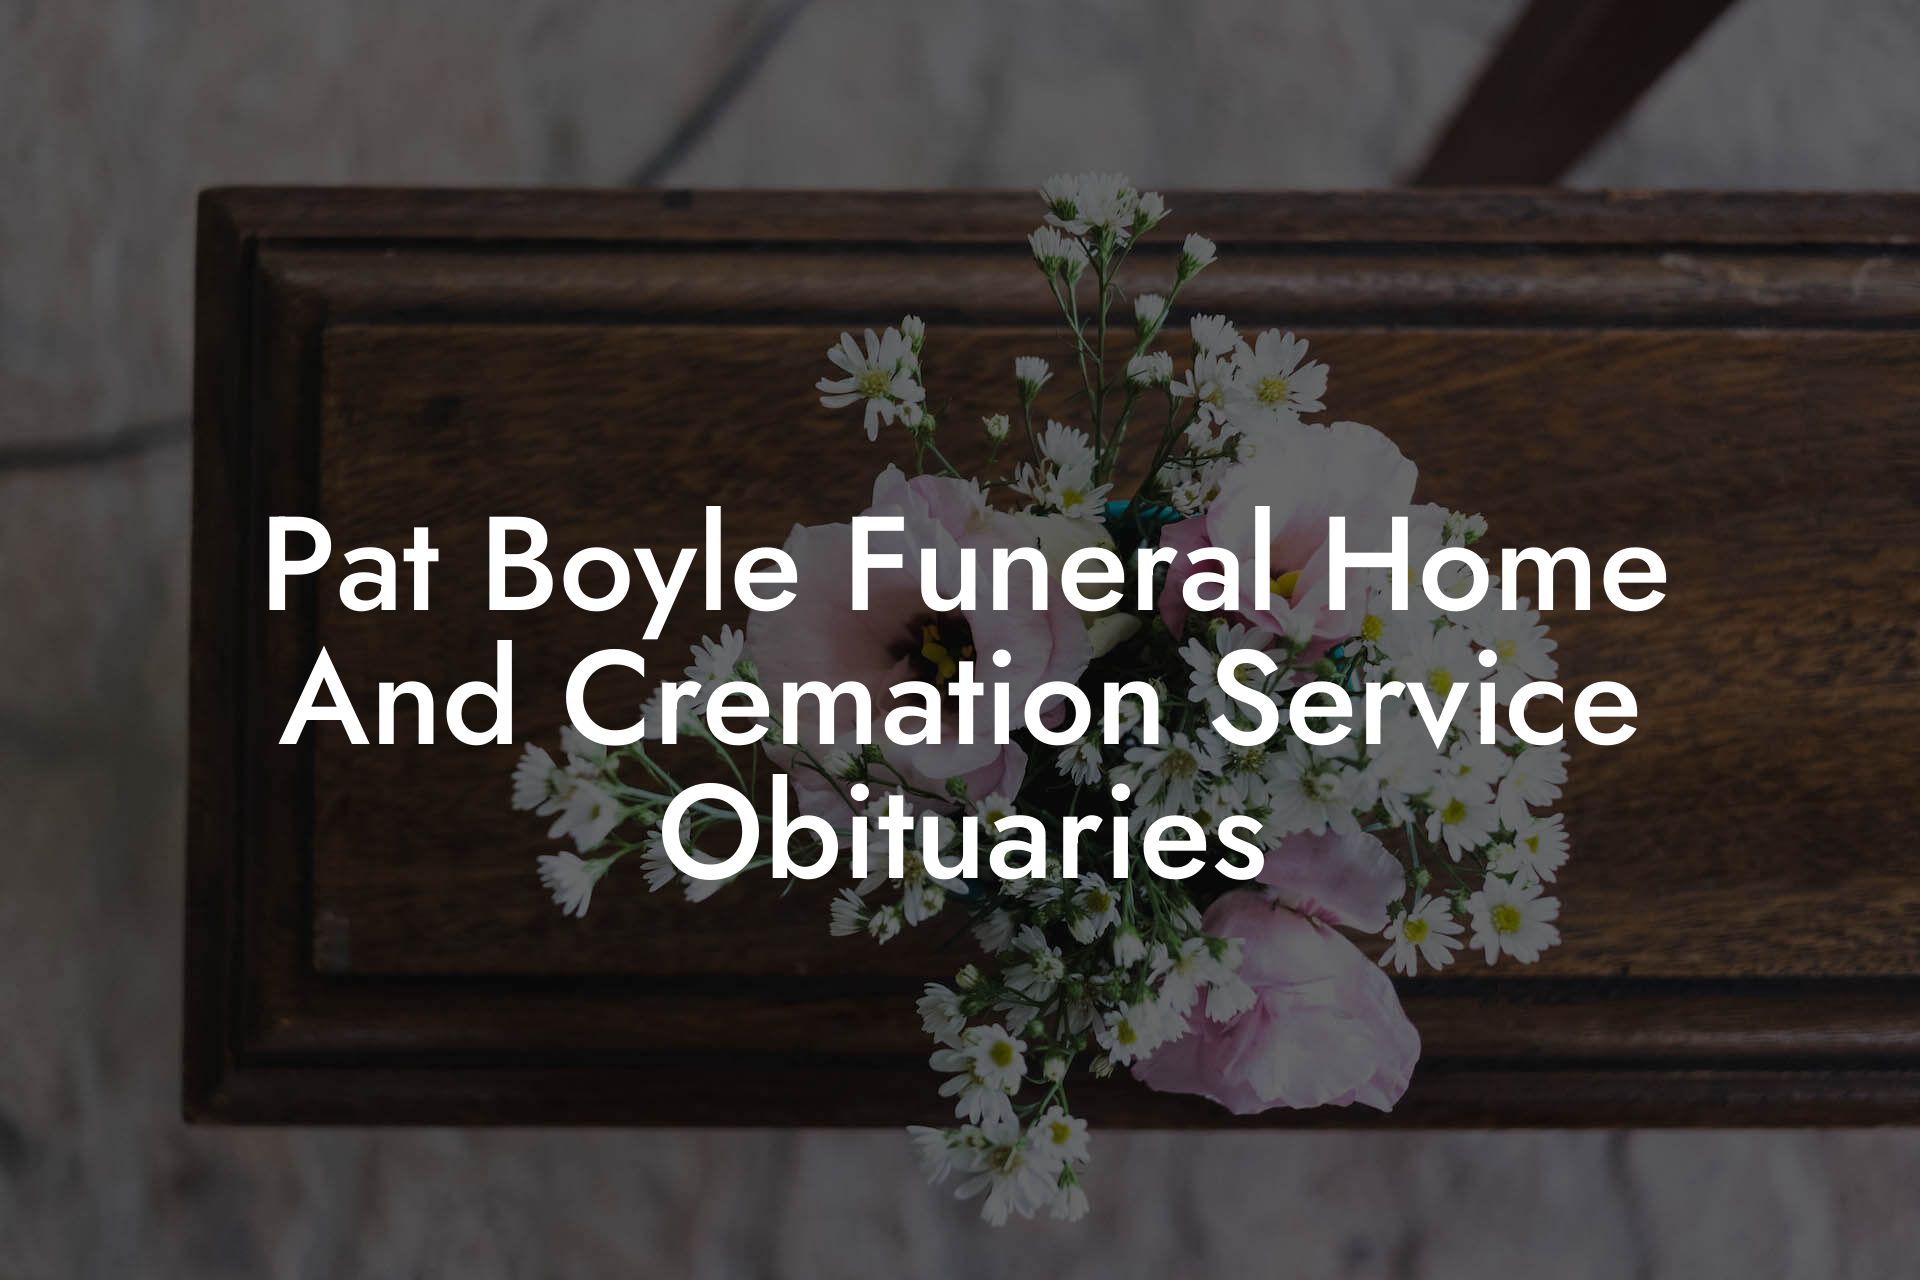 Pat Boyle Funeral Home And Cremation Service Obituaries